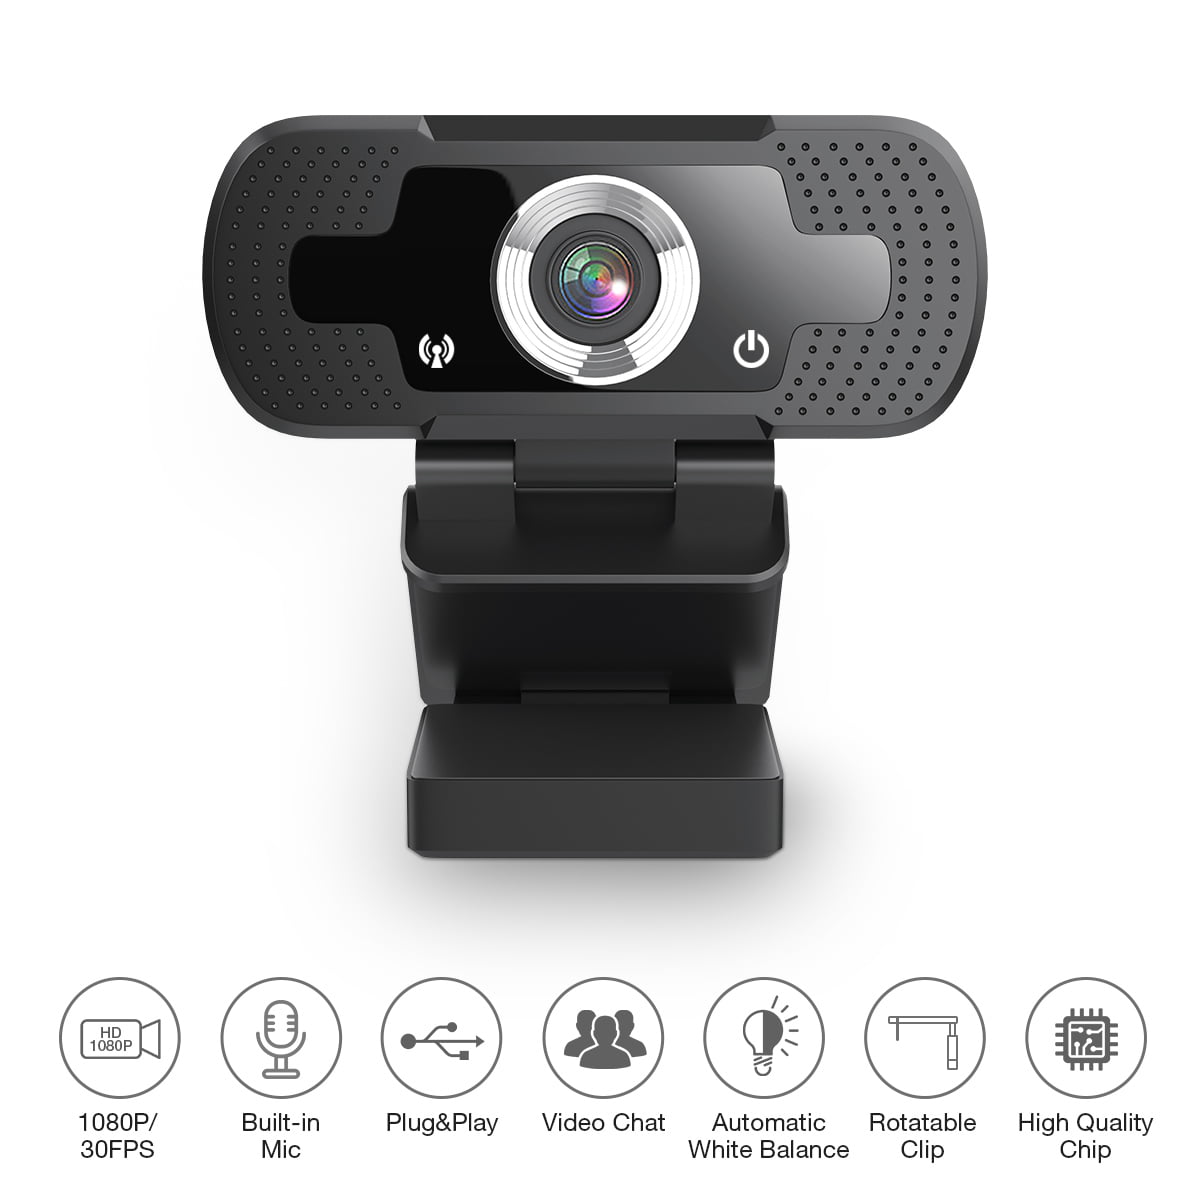 Conferencing Gaming，Live Streaming Widescreen Webcam-Black Video Recording，Calling Autofocus 5 Megapixel Full HD Computer Camera Webcam 1080P with Microphone